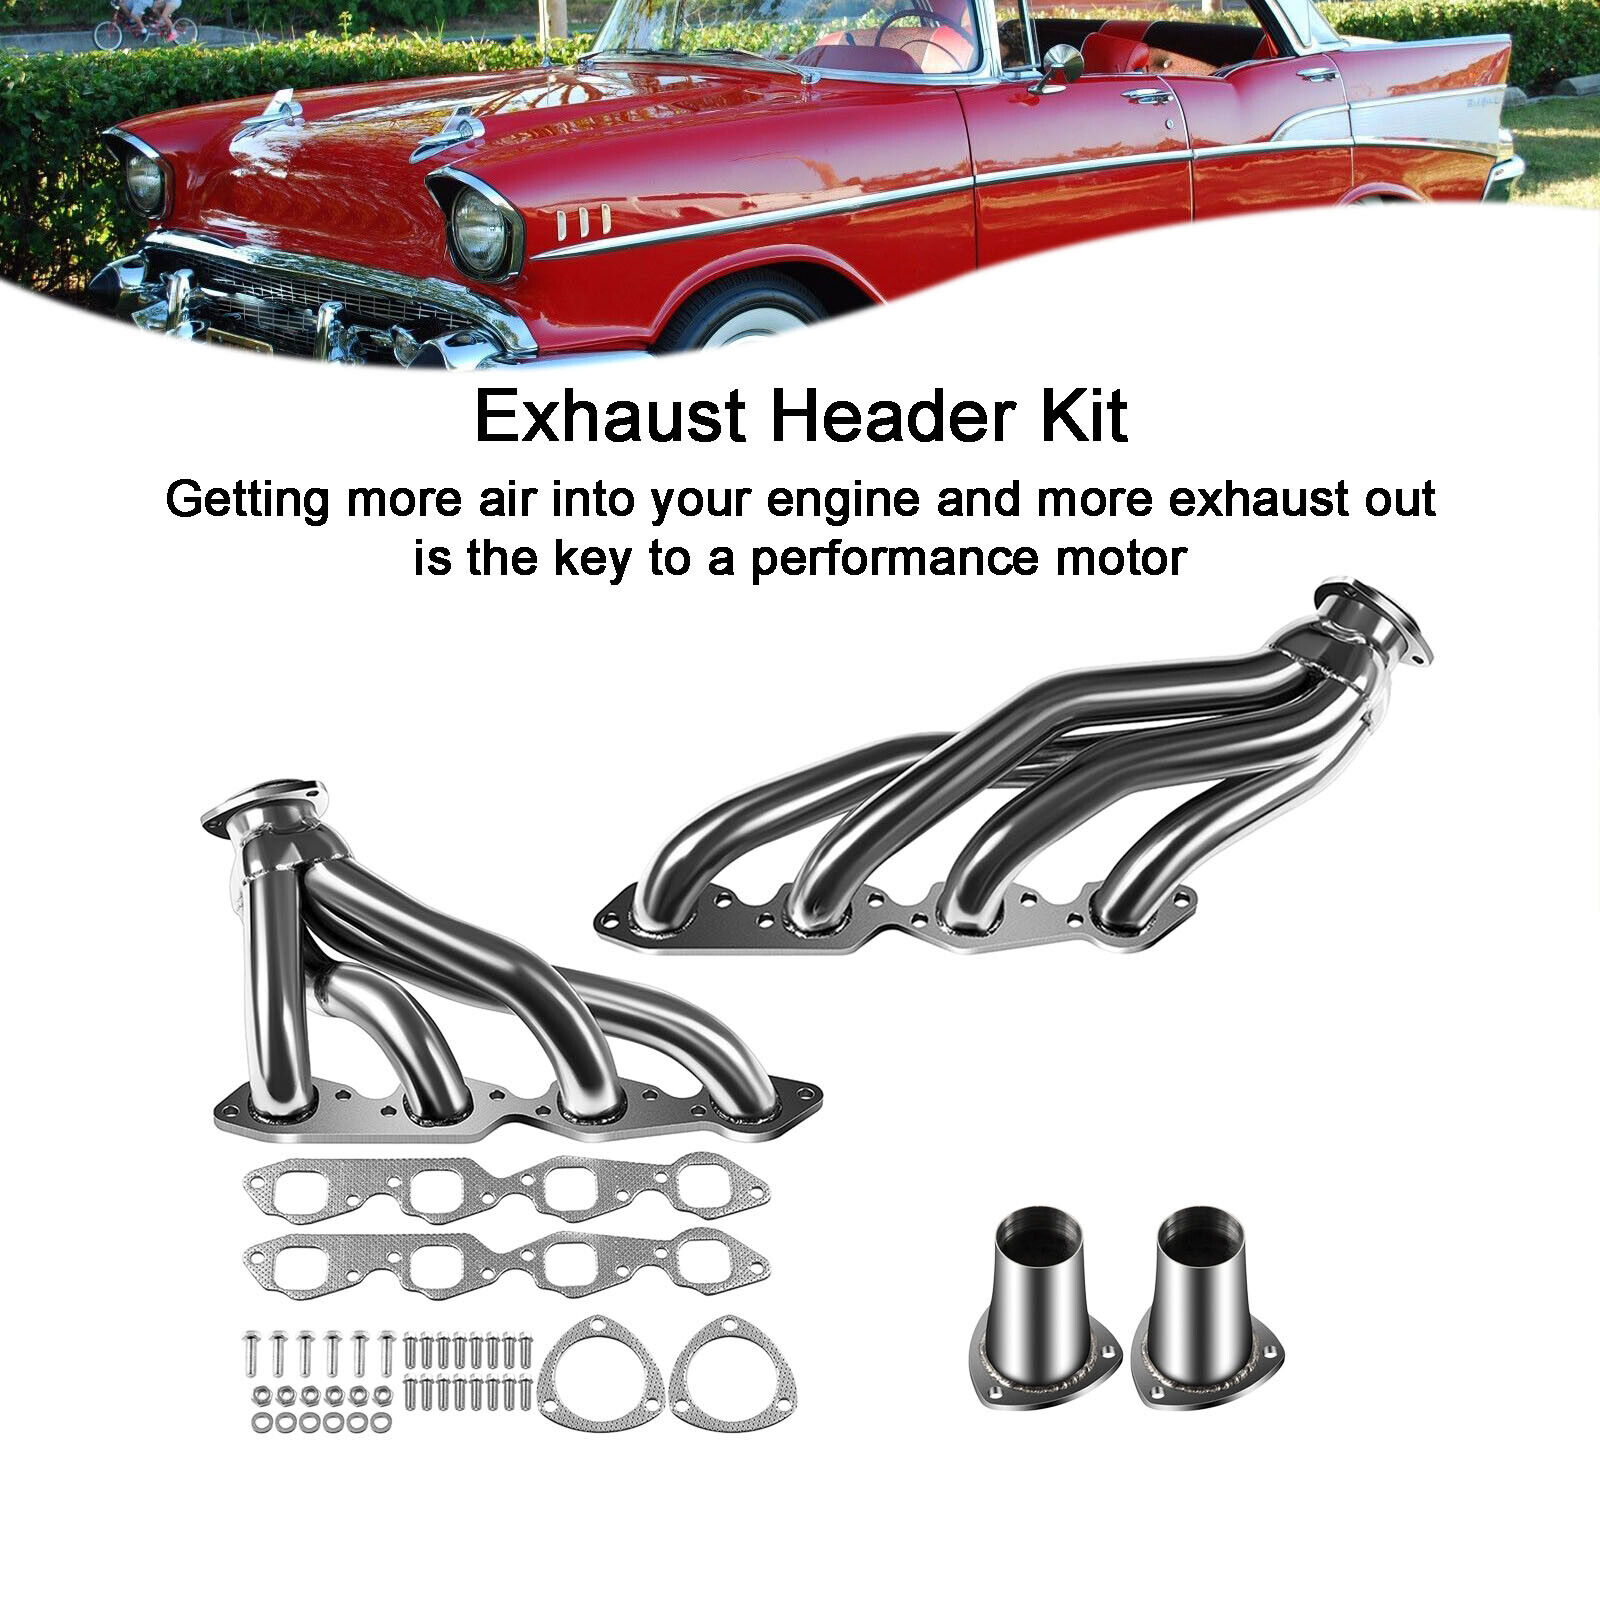 1× Shorty Exhaust Header Kit For Chevy Bel Air Impala Chevelle 6.6L 1971-1972 US